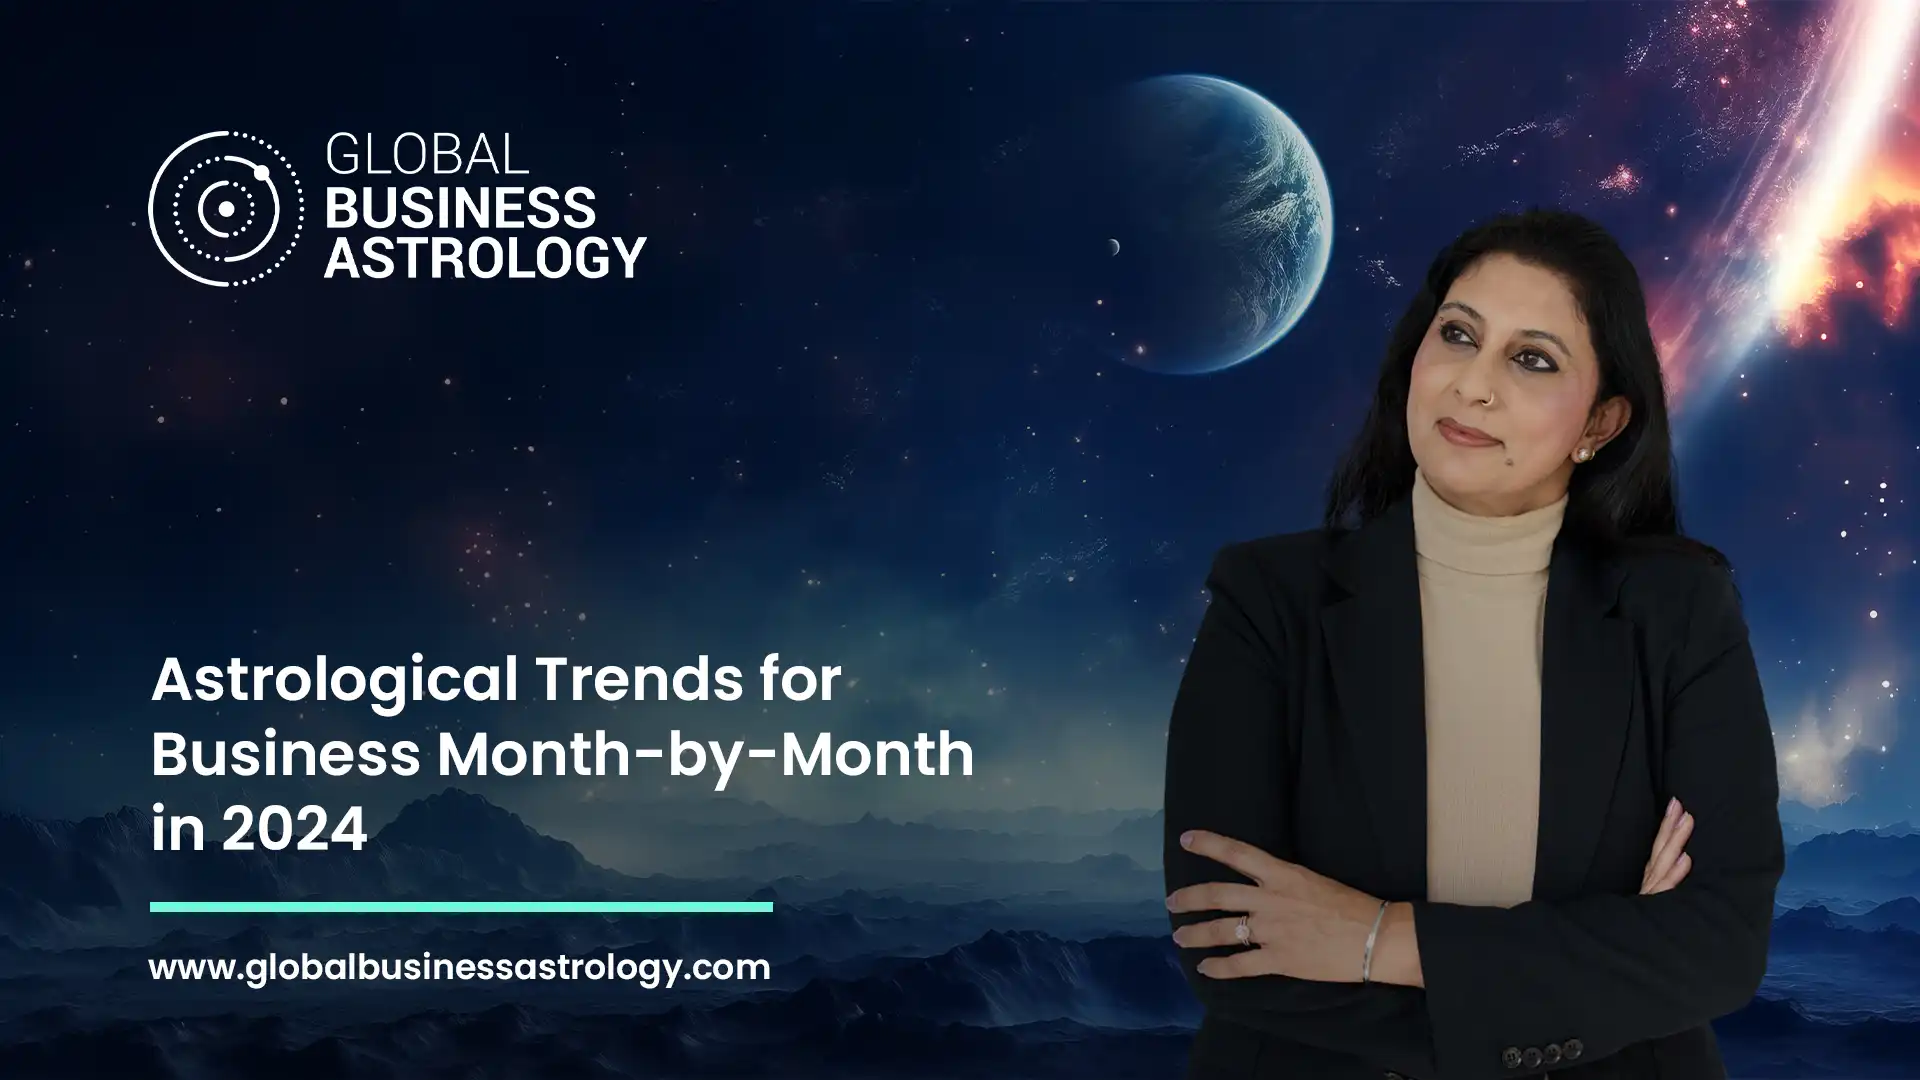 Astrological Trends for Business Month-by-Month in 2024